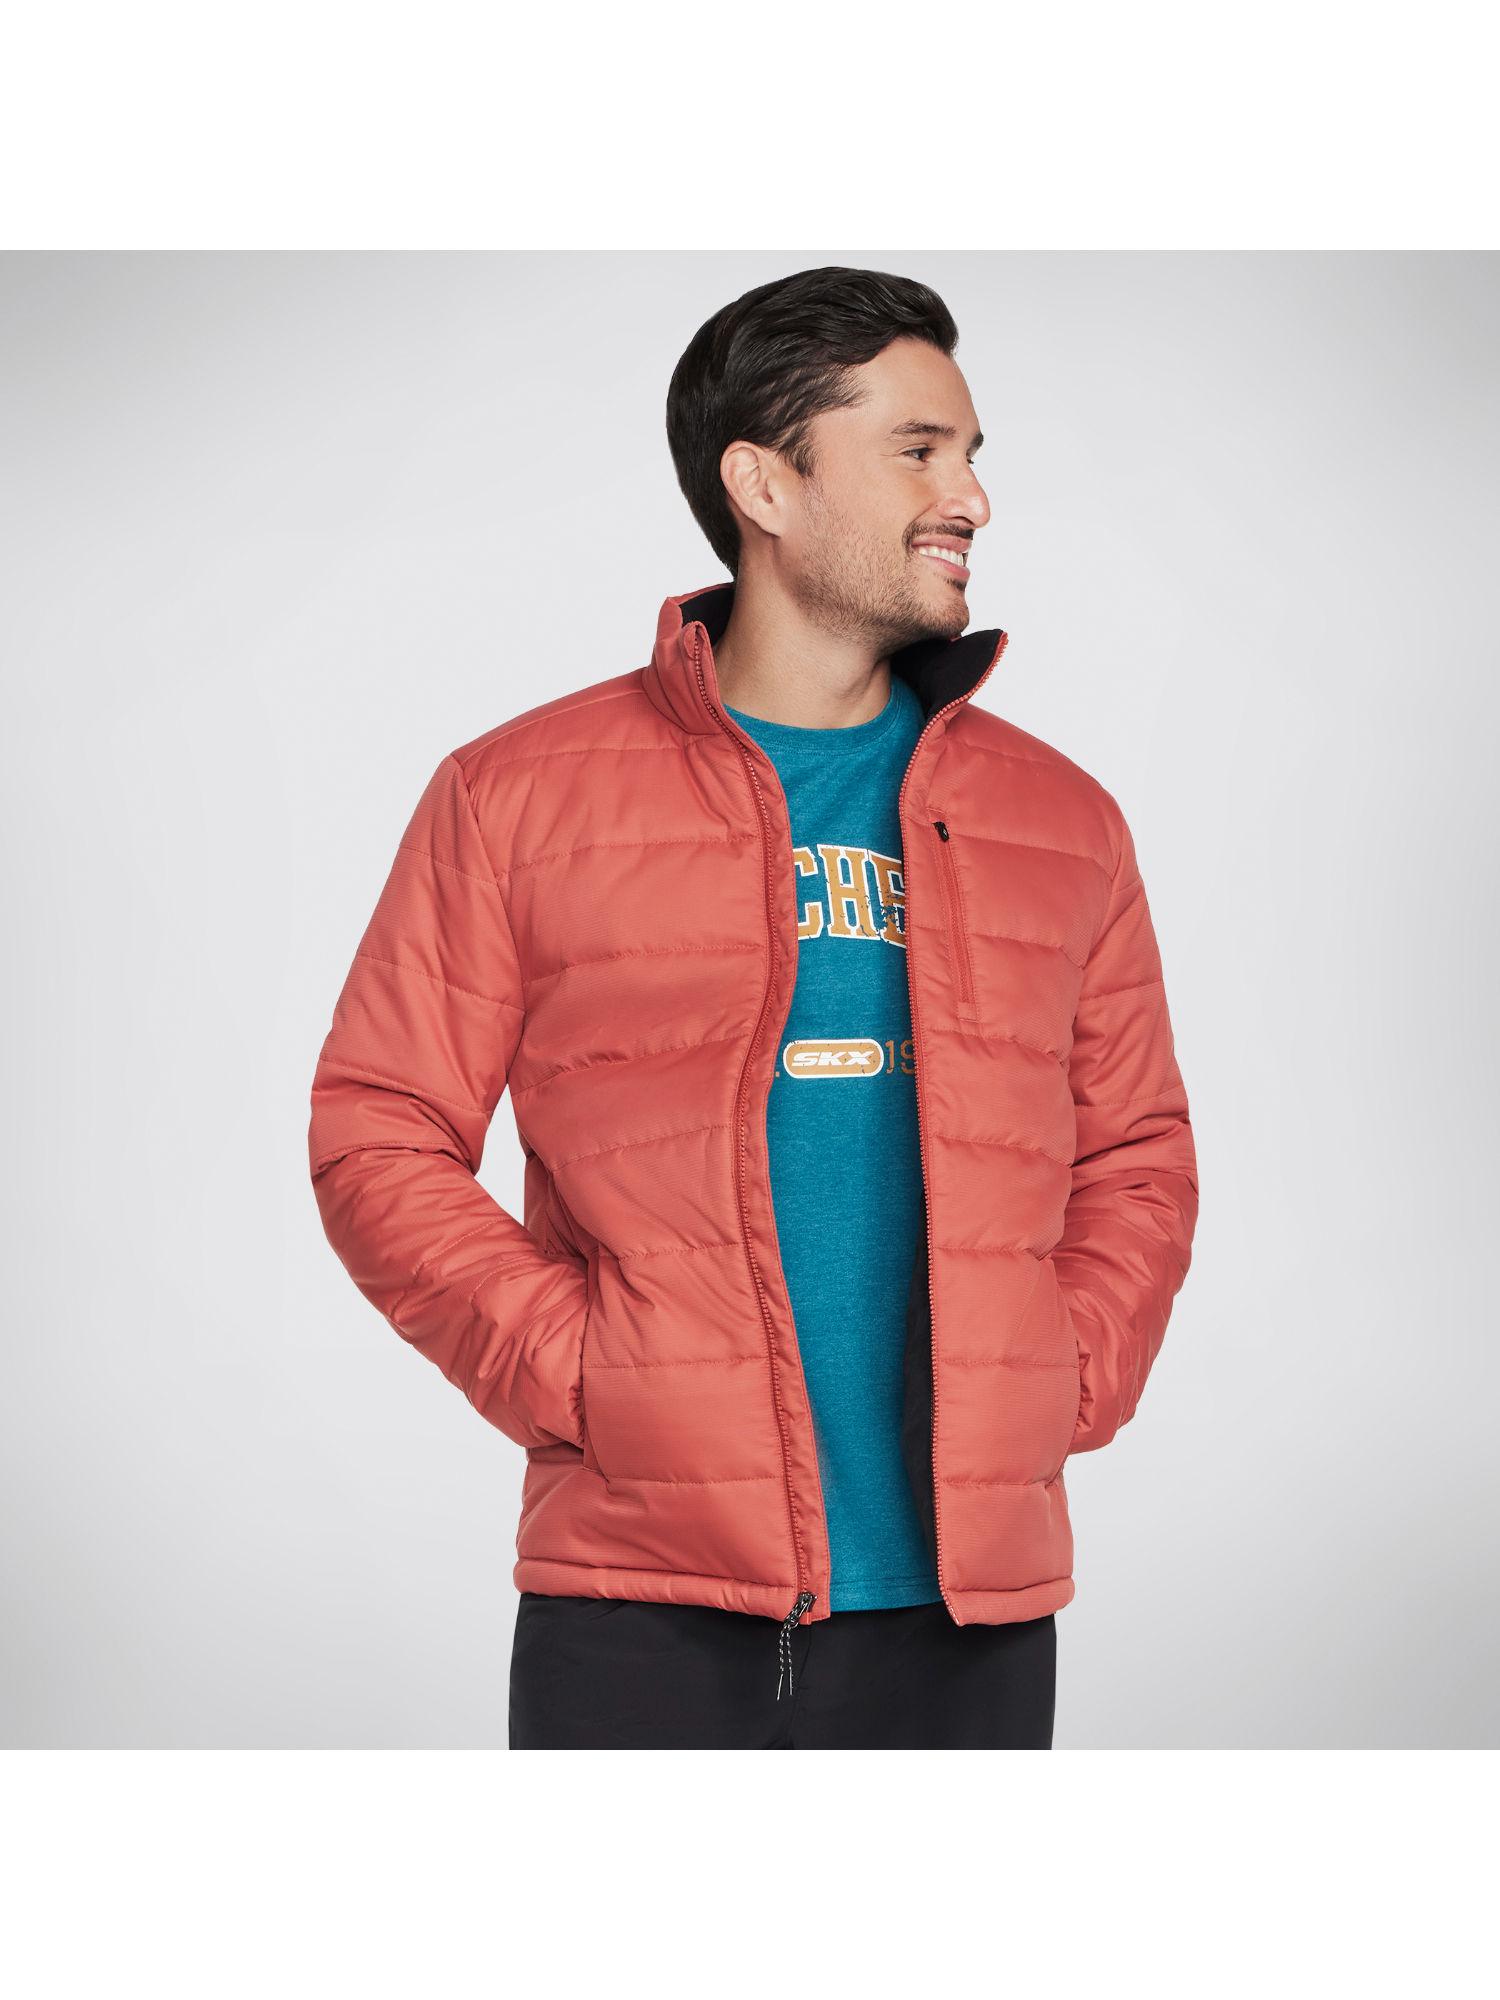 Go Shield Puffer Jacket Red